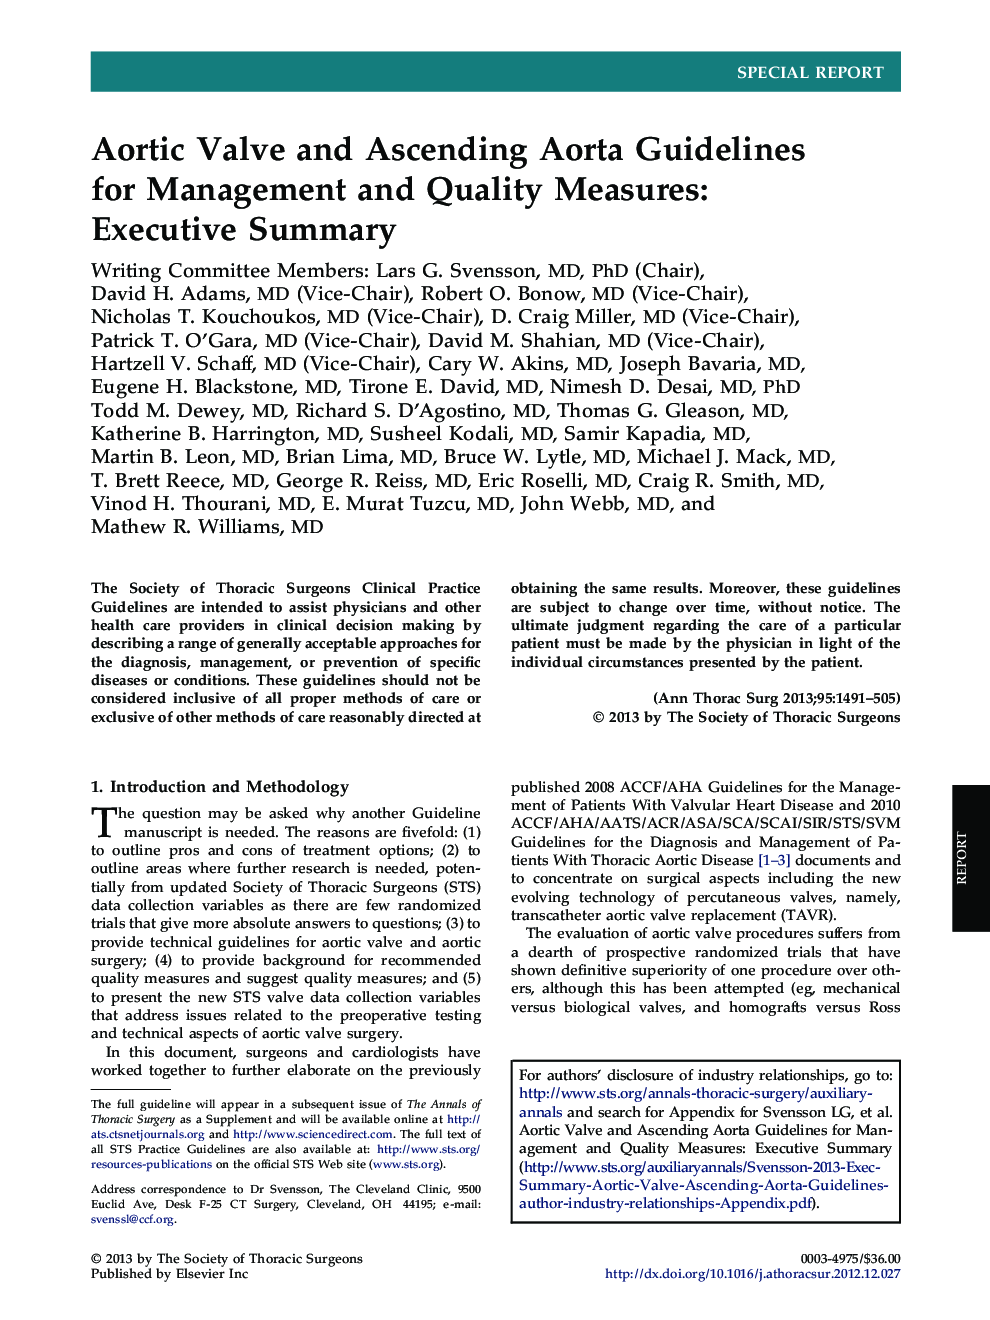 Aortic Valve and Ascending Aorta Guidelines for Management and Quality Measures: Executive Summary